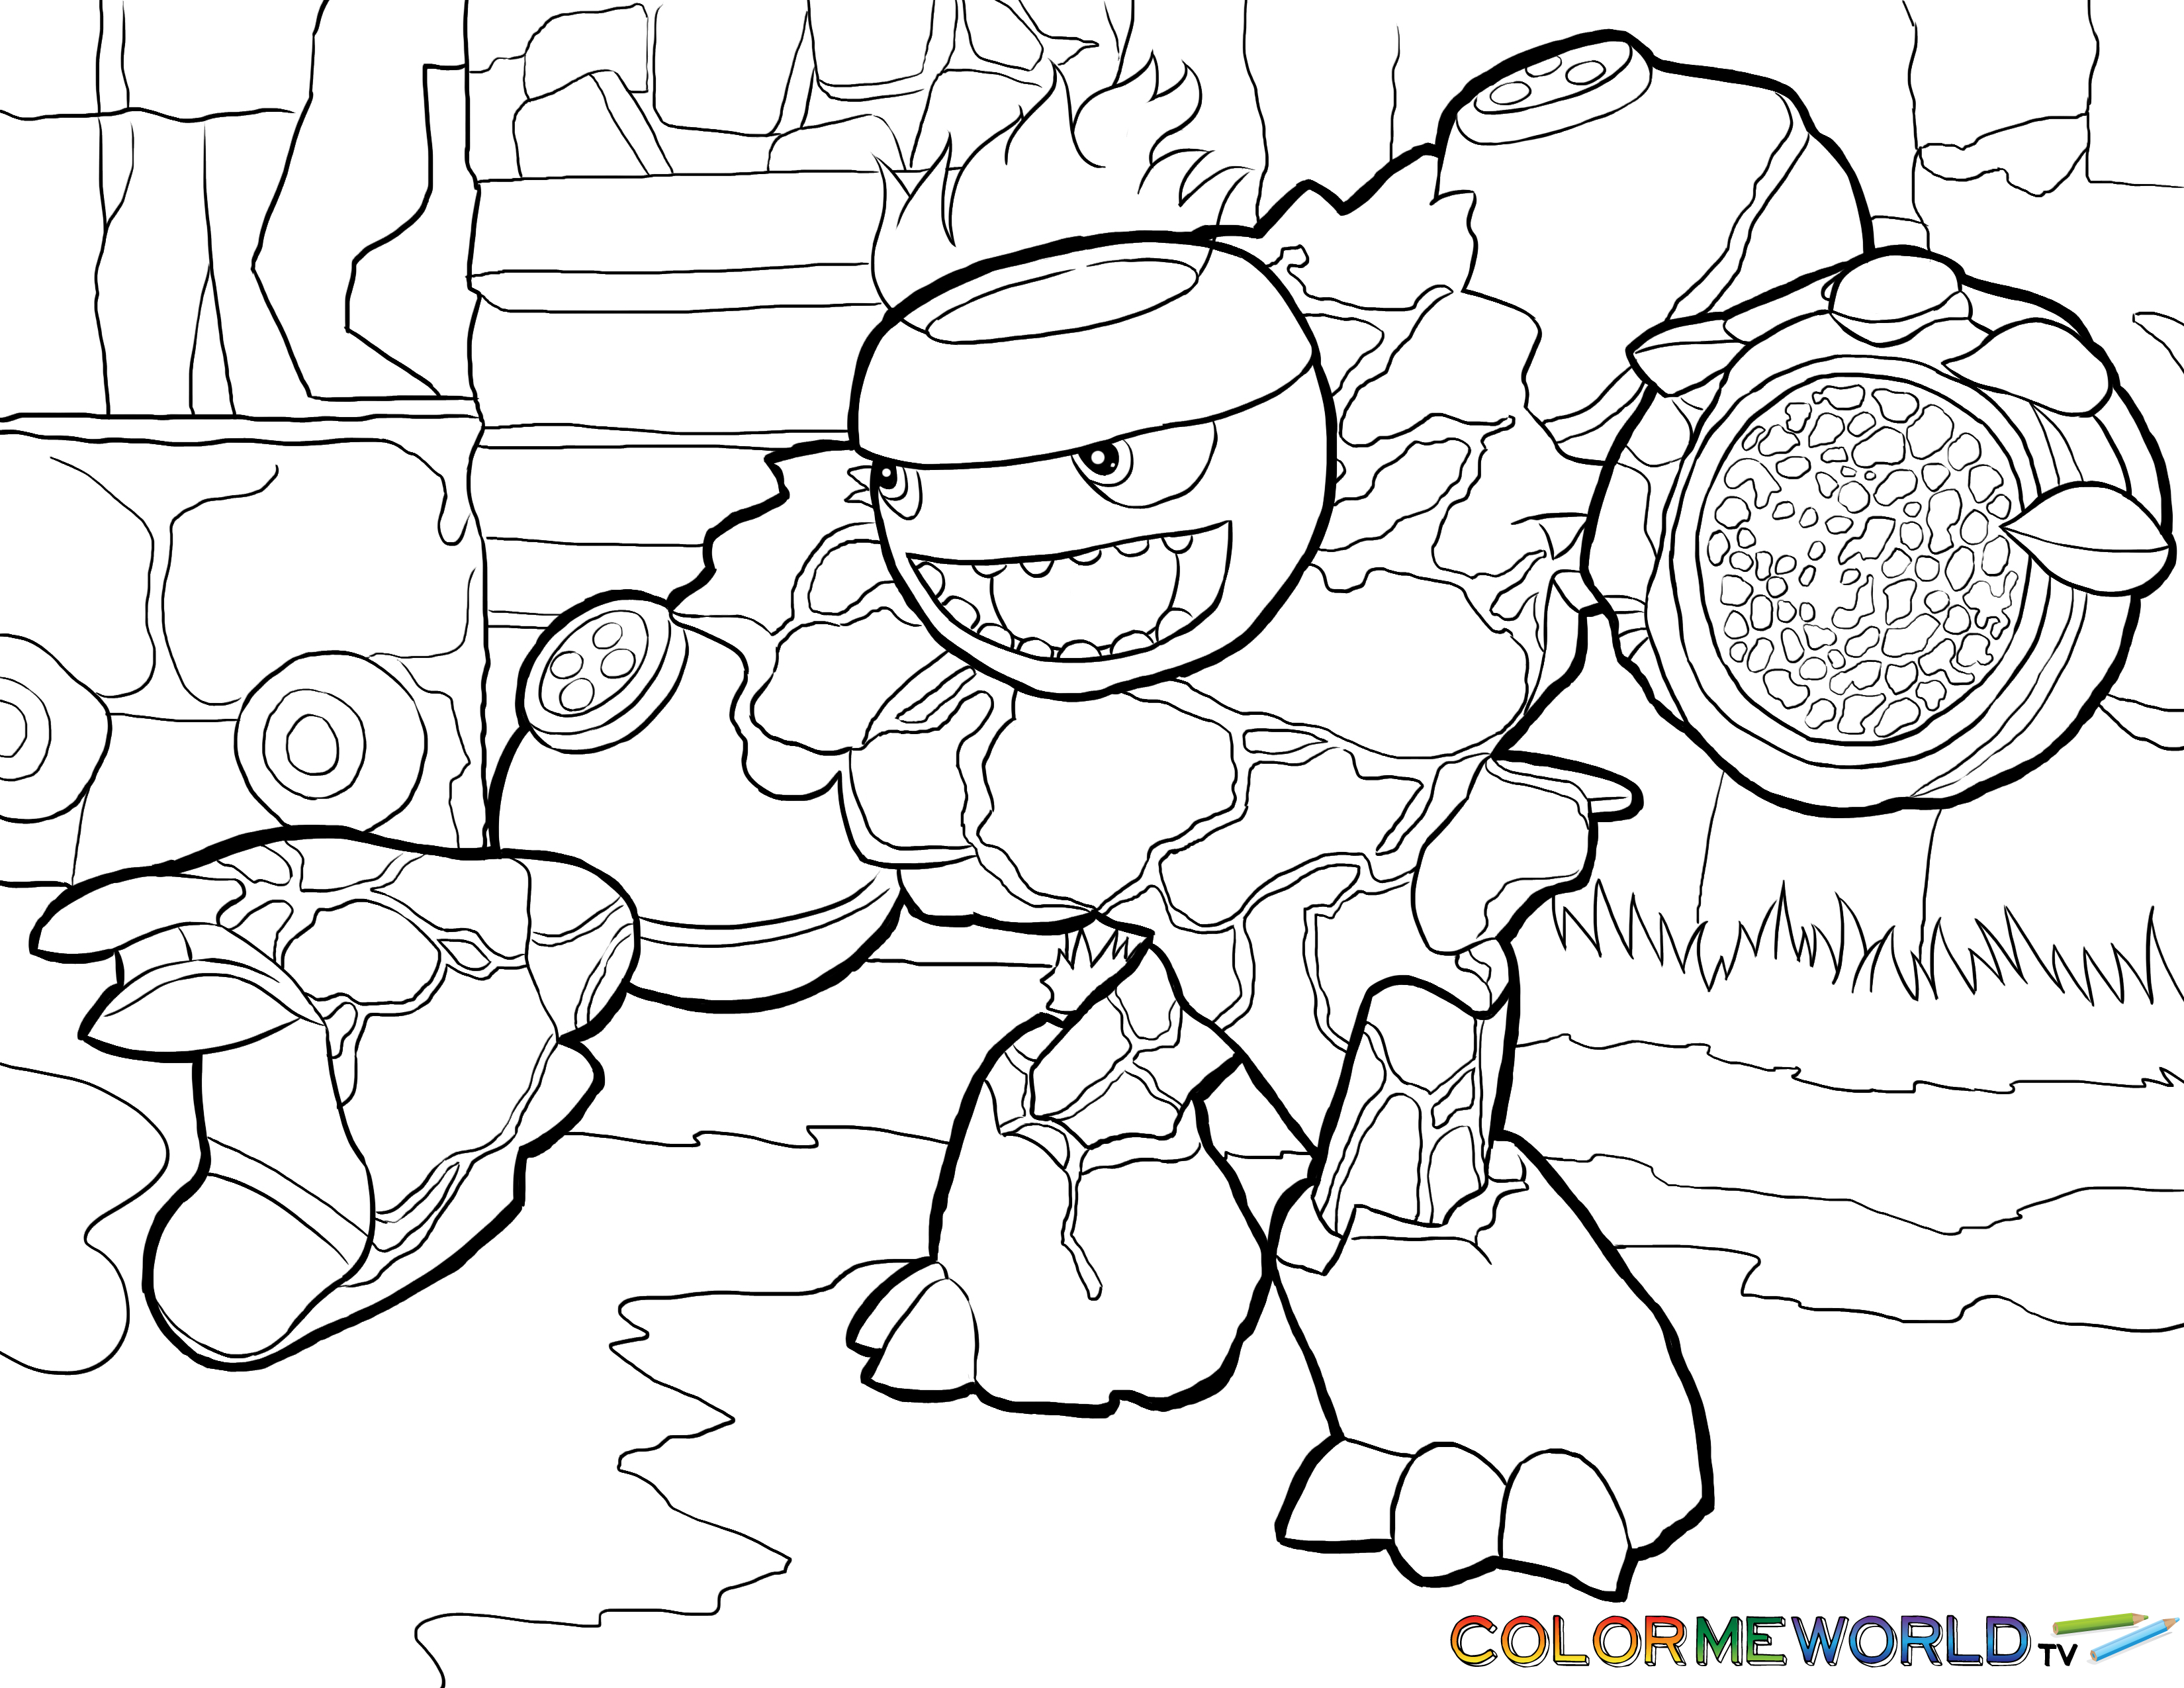 Skylander Giant Coloring Pages (20 Pictures) - Colorine.net | 2979